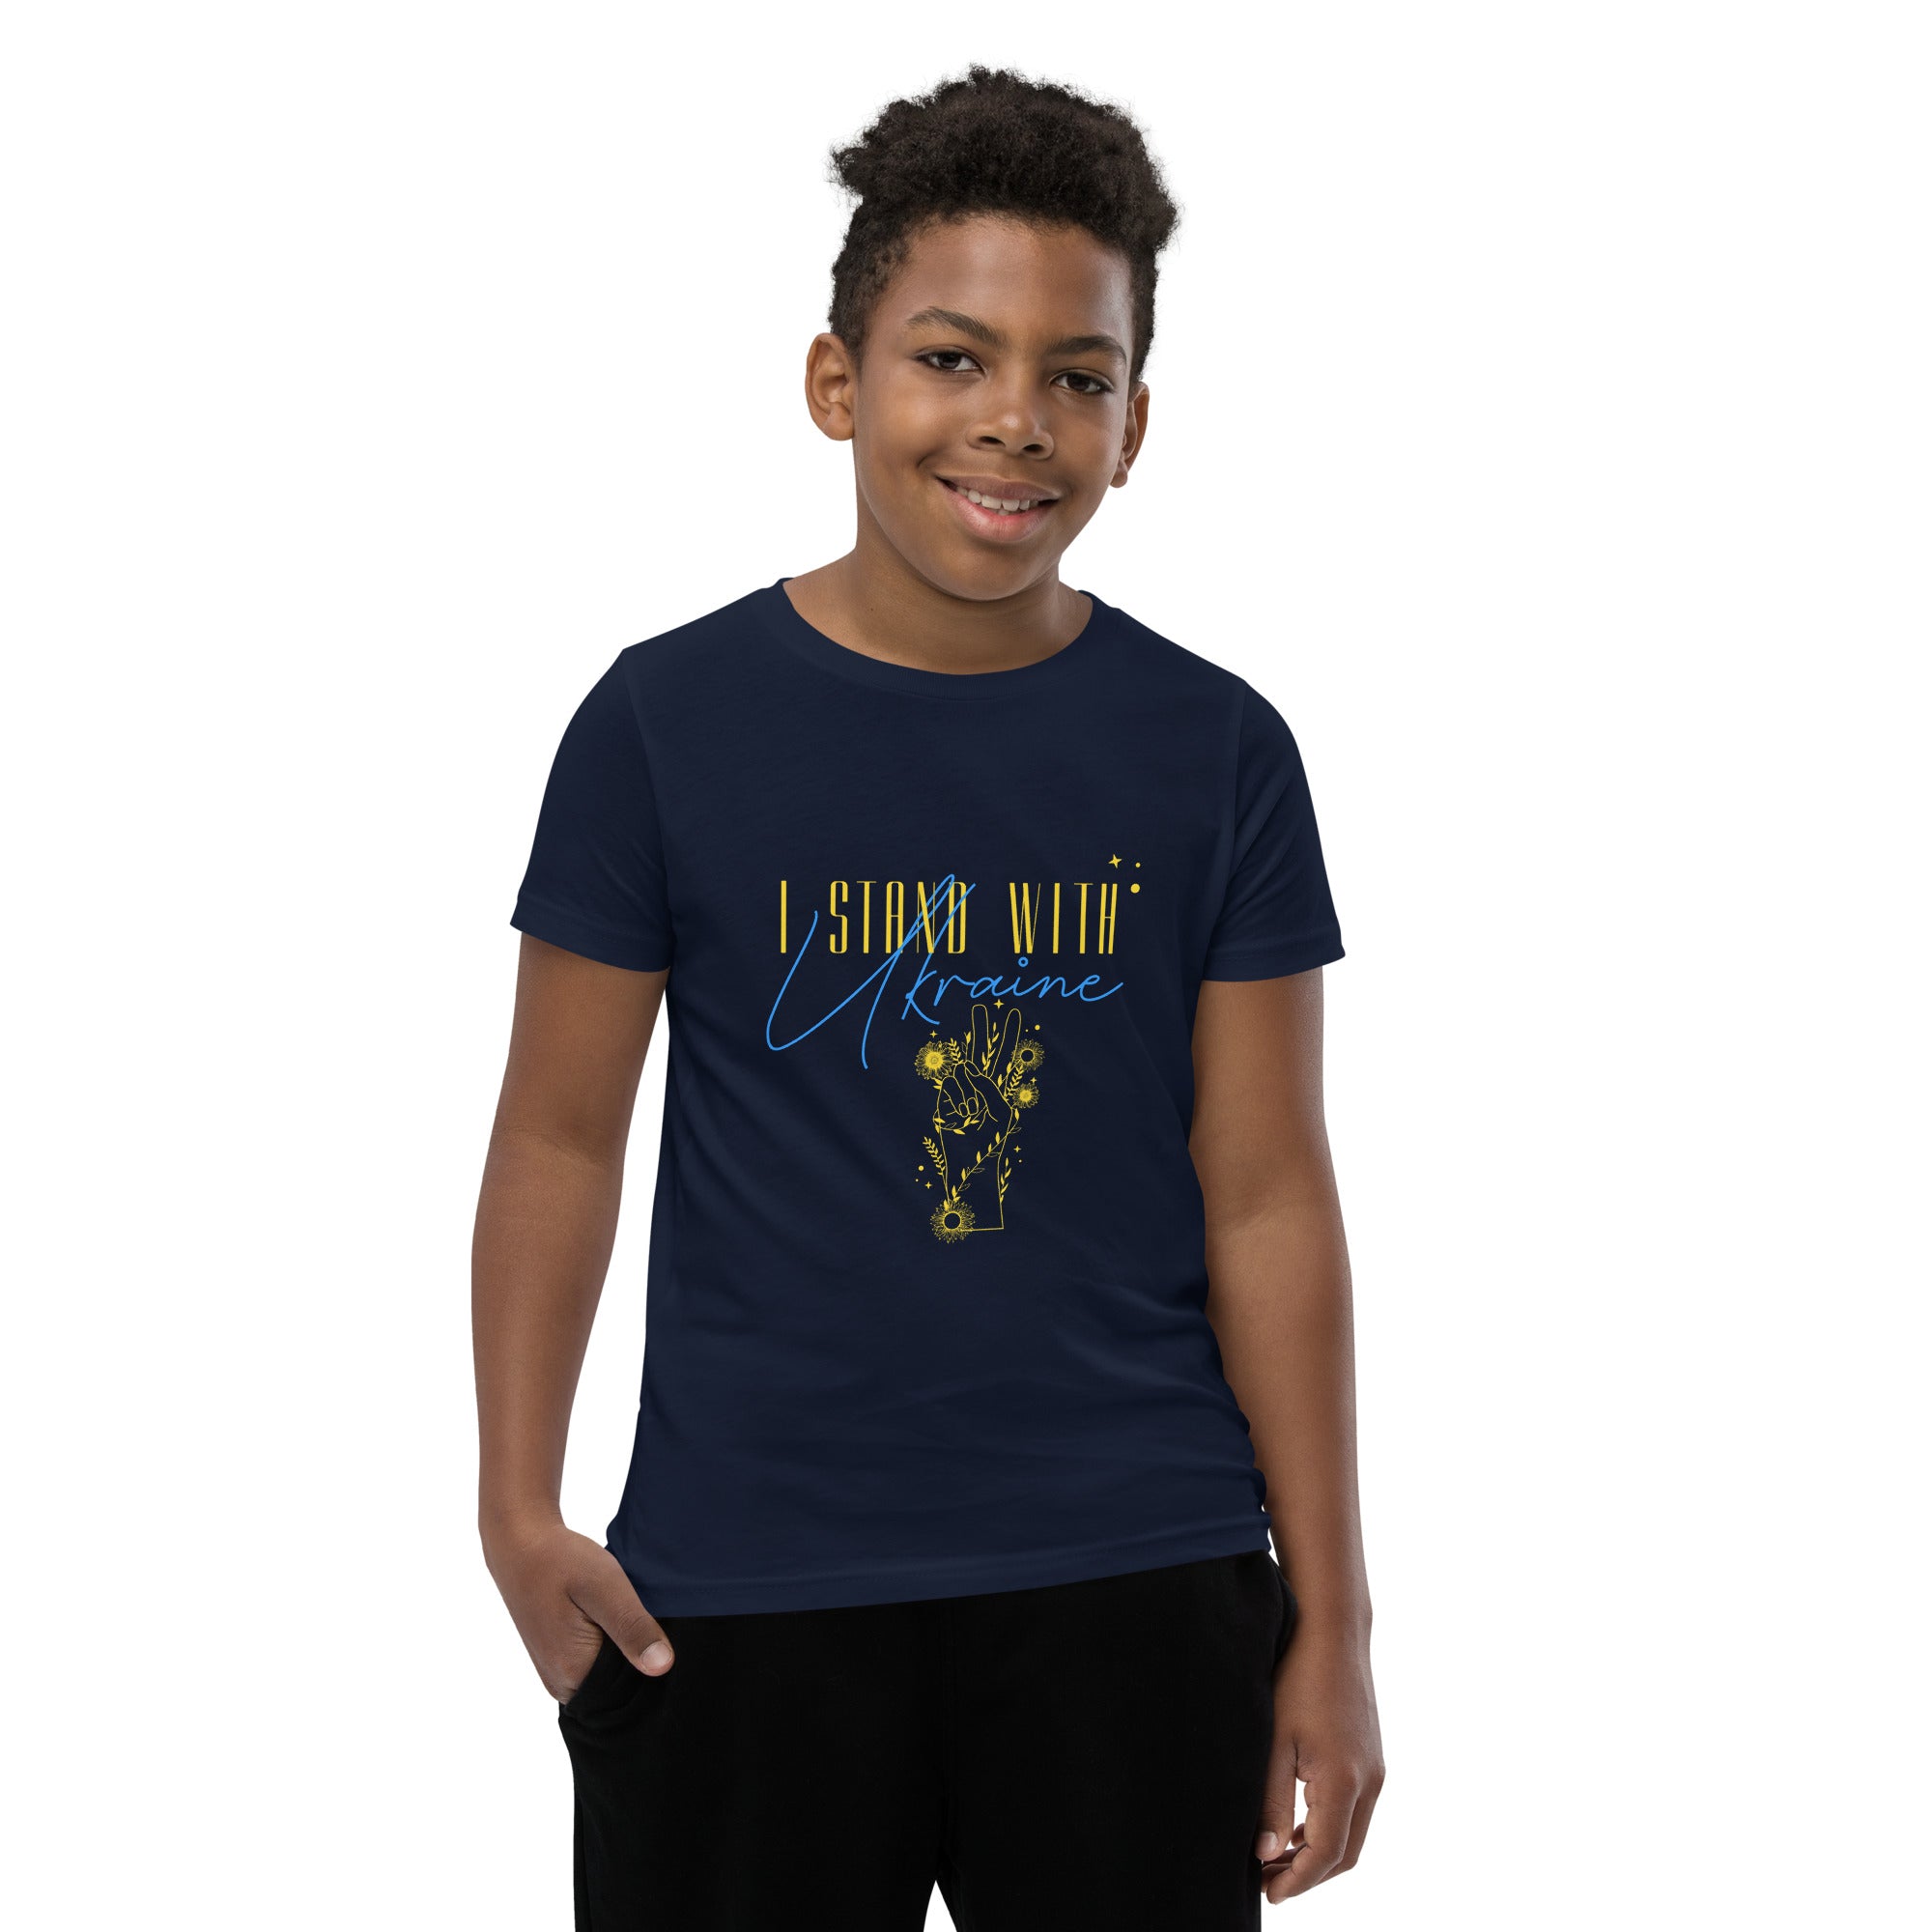 Youth Short Sleeve T-Shirt "I stand with Ukraine"